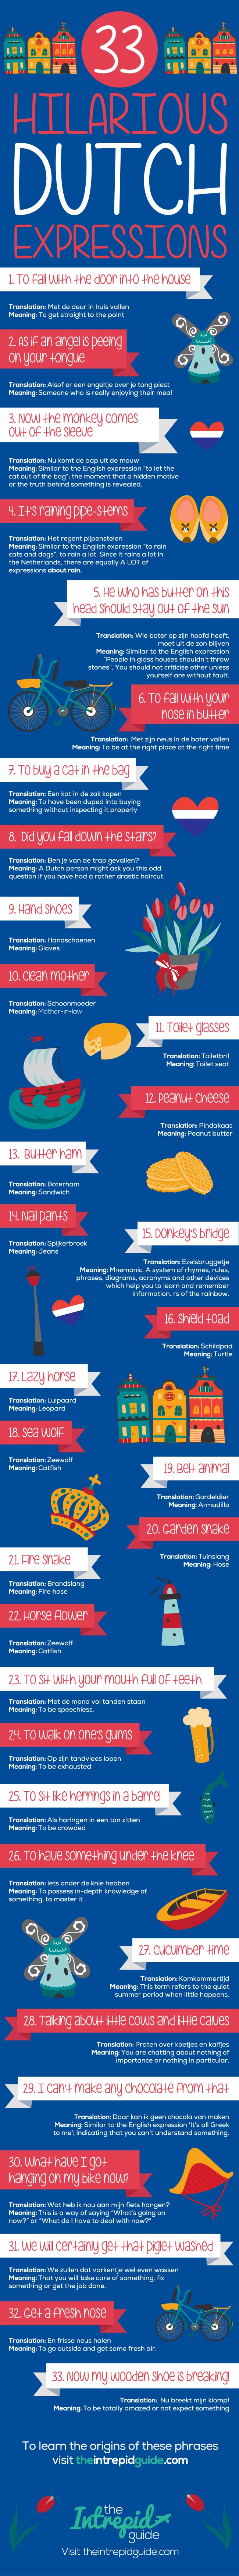 dutch phrases and idioms infographic